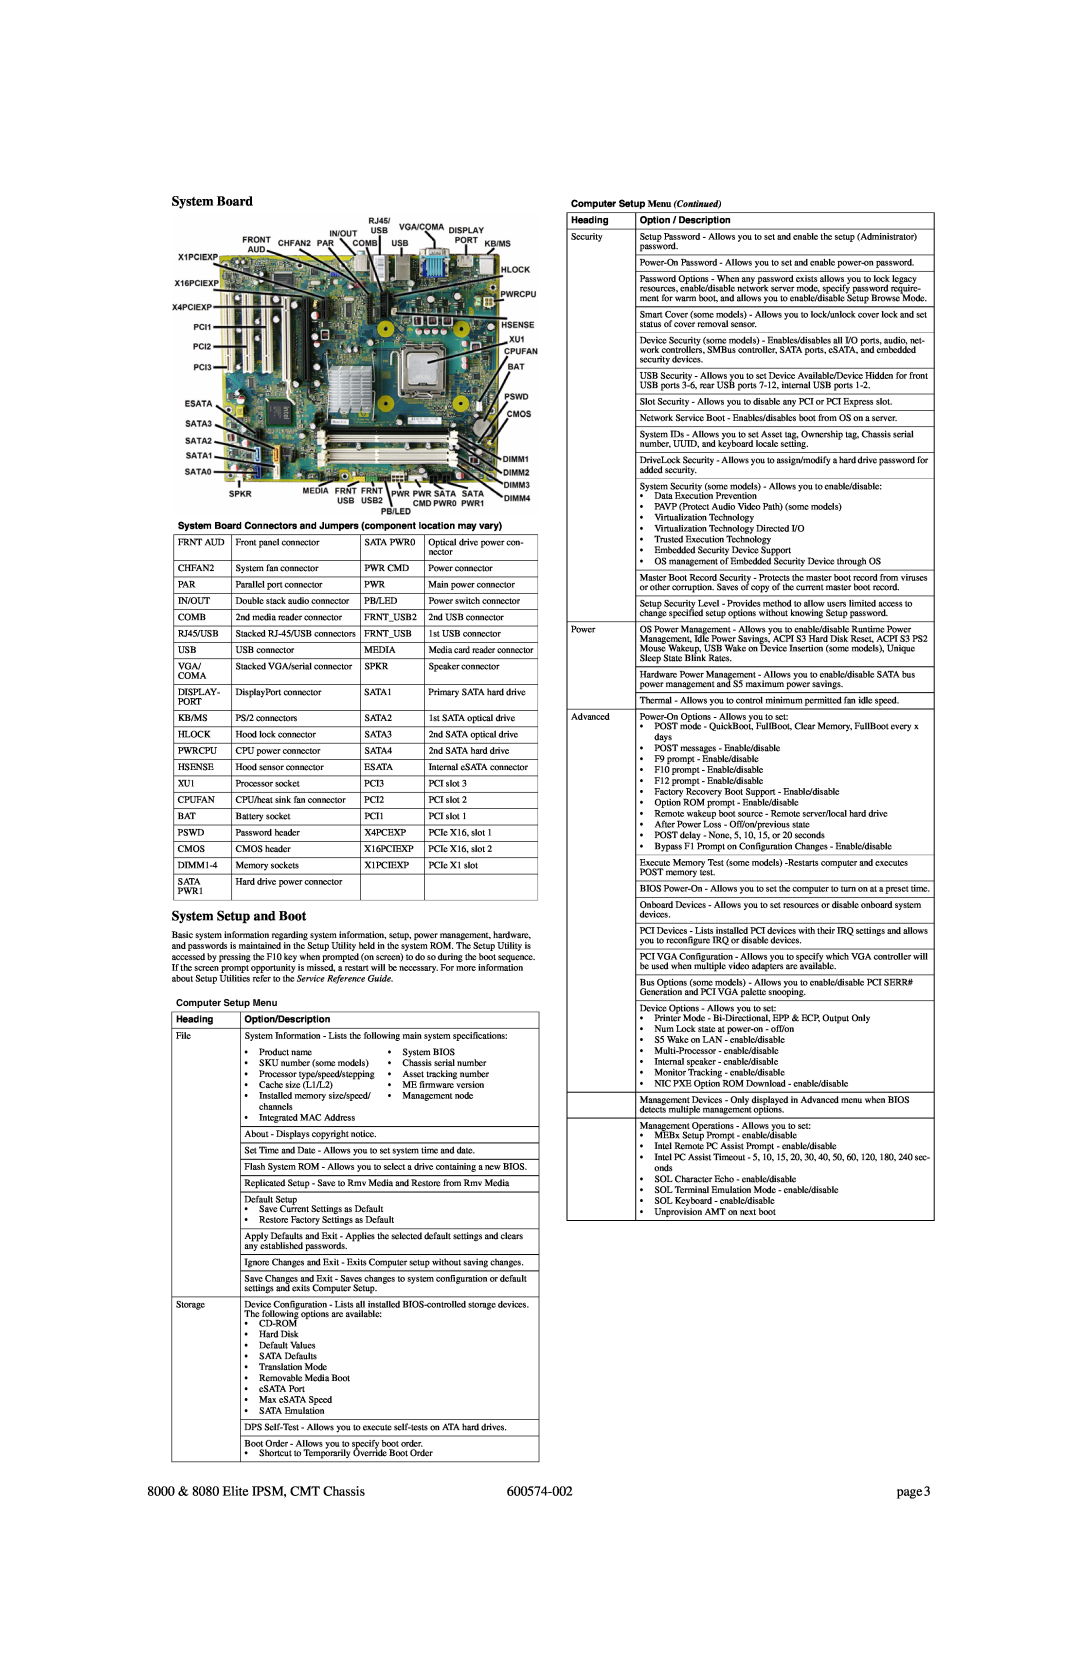 Compaq 8080 System Setup and Boot, System Board Connectors and Jumpers component location may vary, Heading, page 